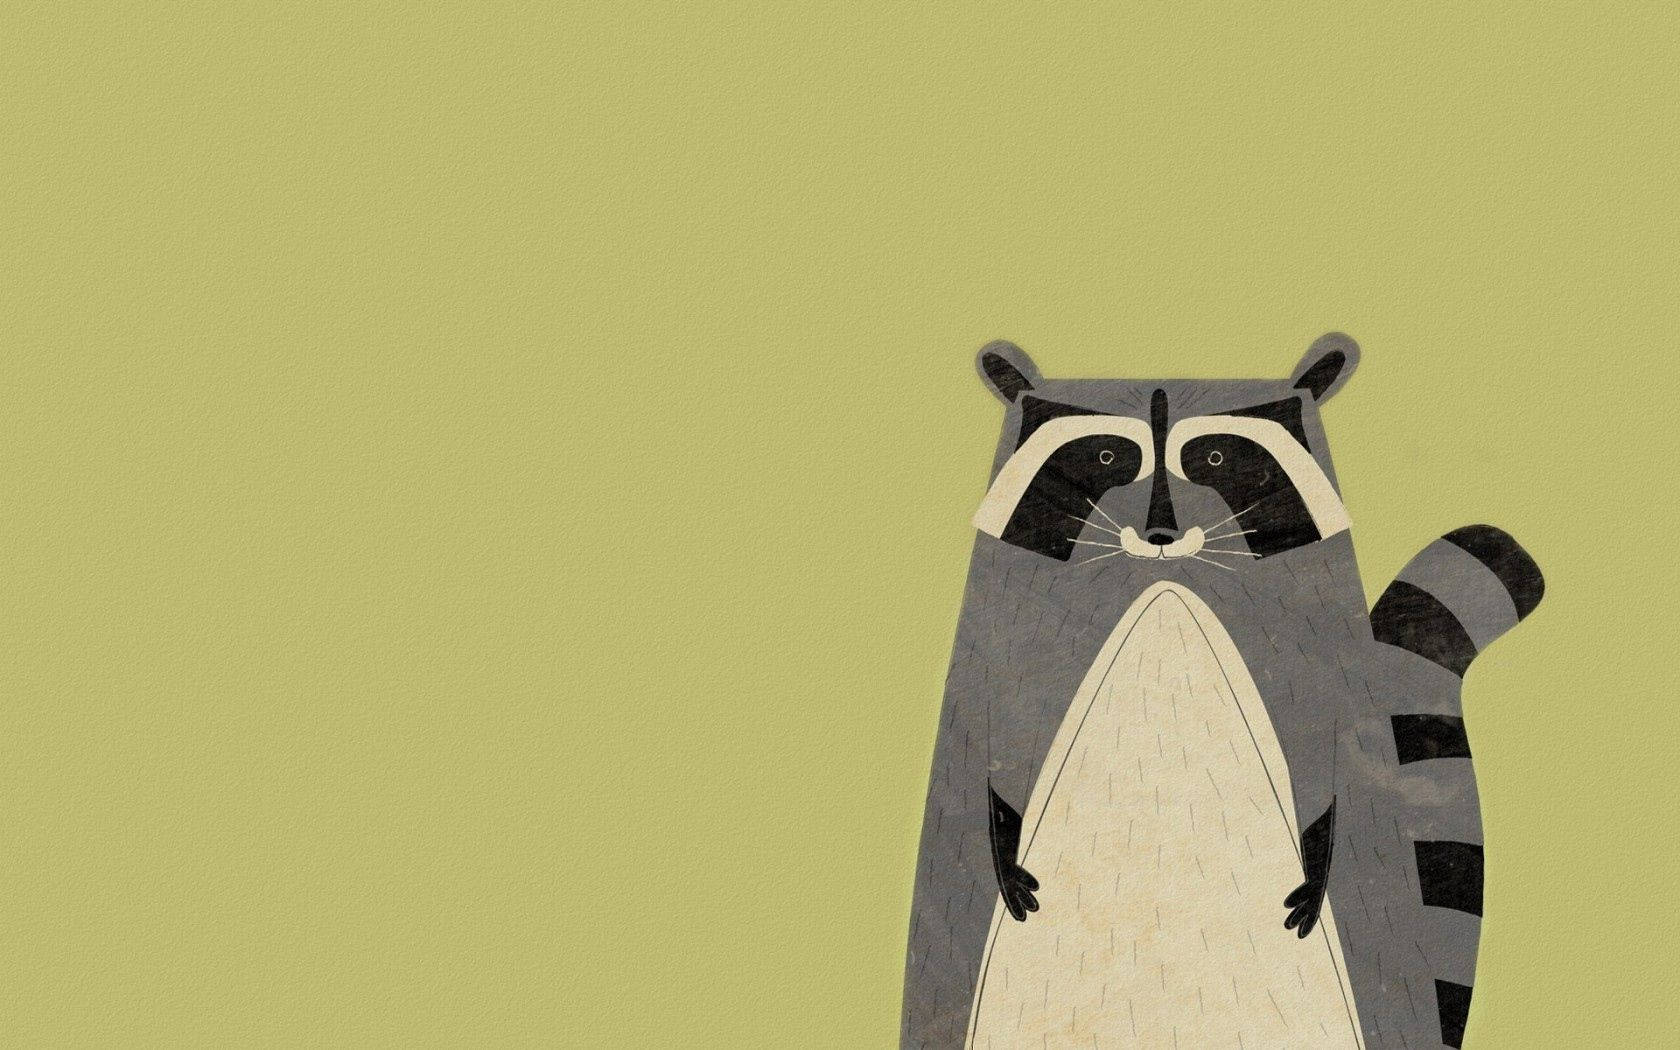 This Cute Animated Racoon Is Out Exploring The World.